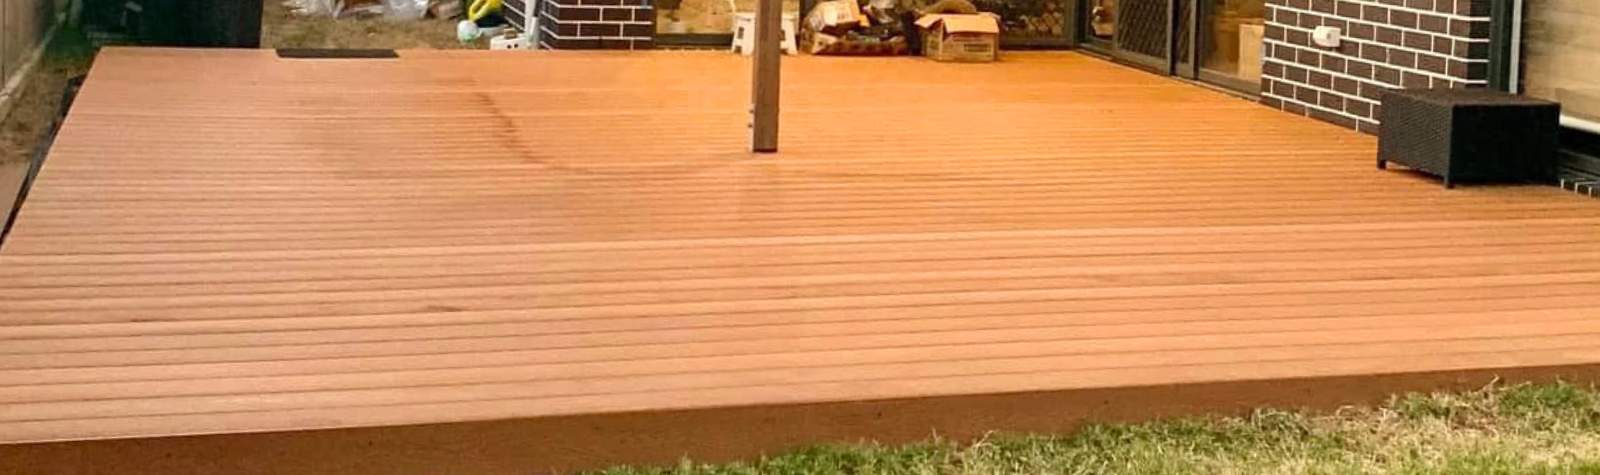 CLASSIC Lightwood composite decking